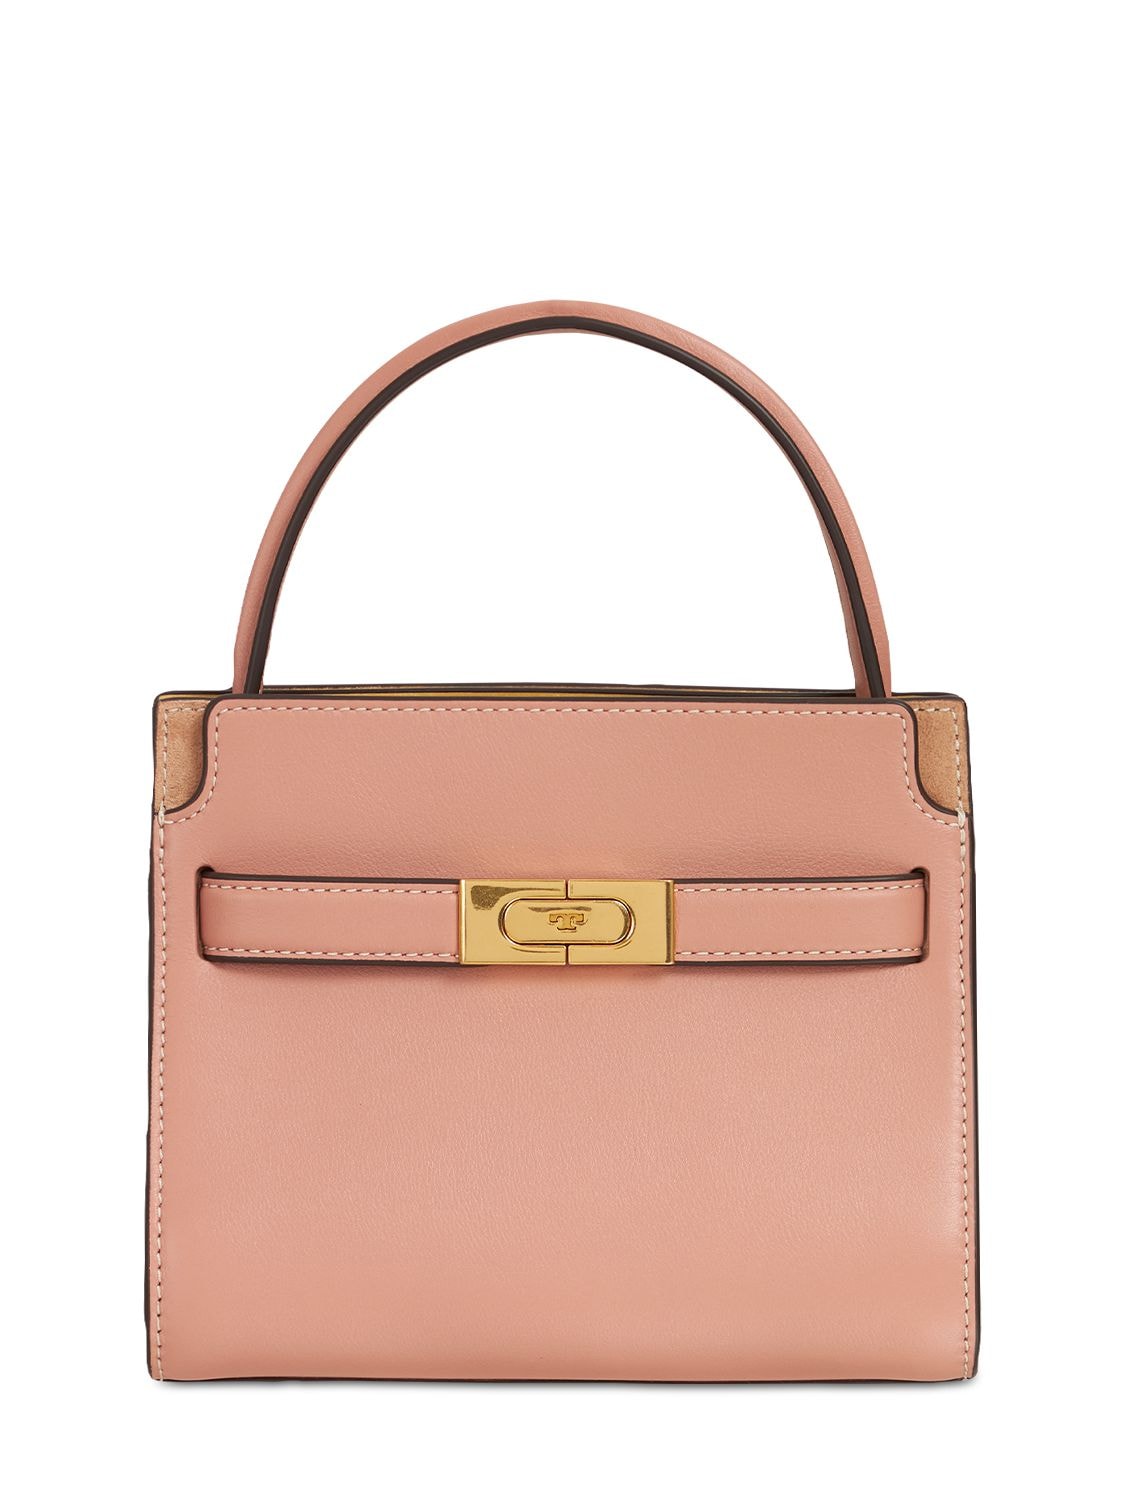 Sm Lee Radziwill Leather Top Handle Bag